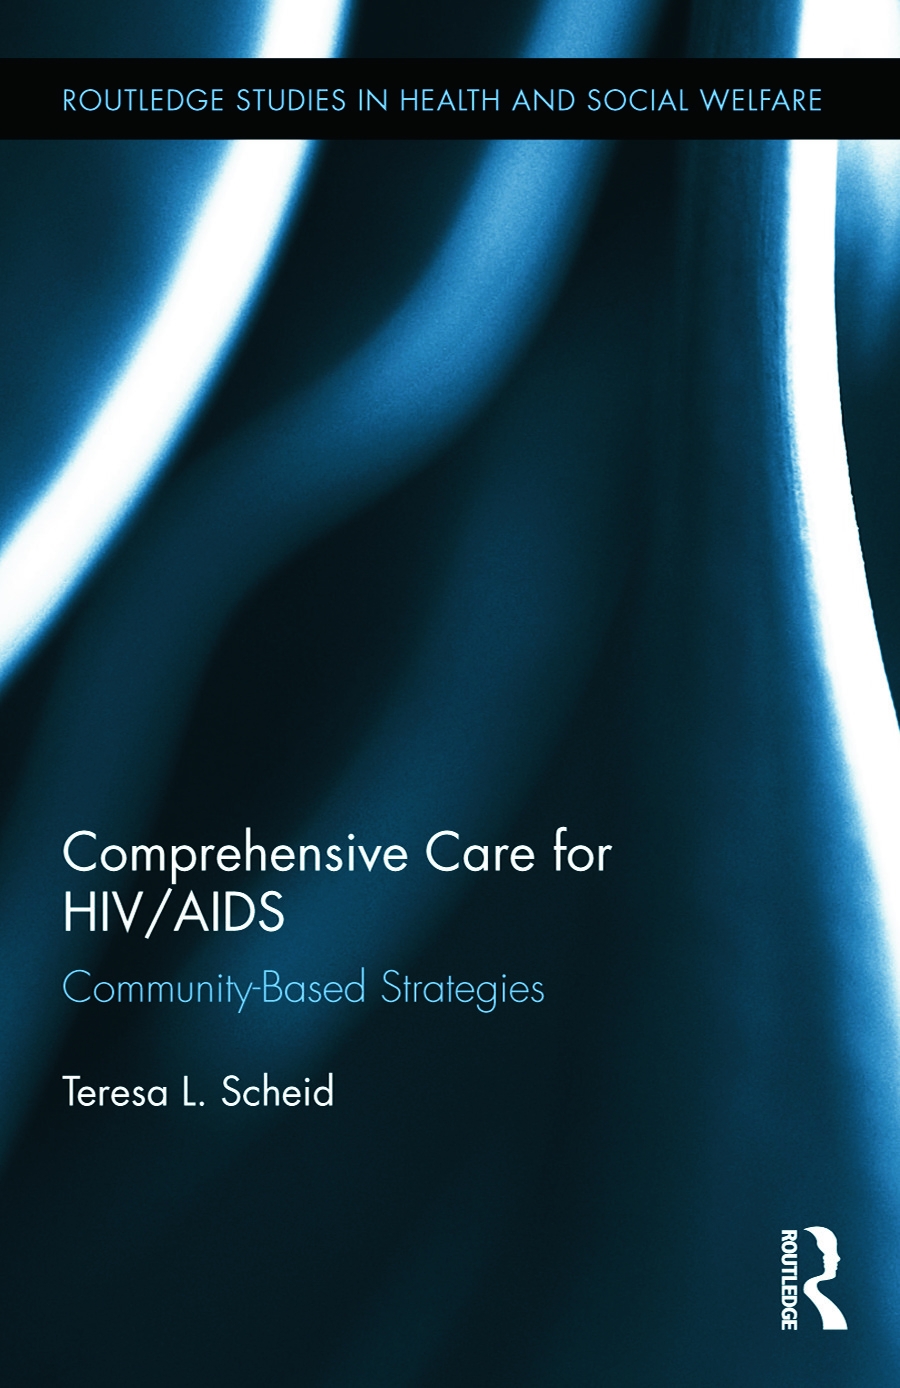 Comprehensive Care for Hiv/AIDS: Community-Based Strategies